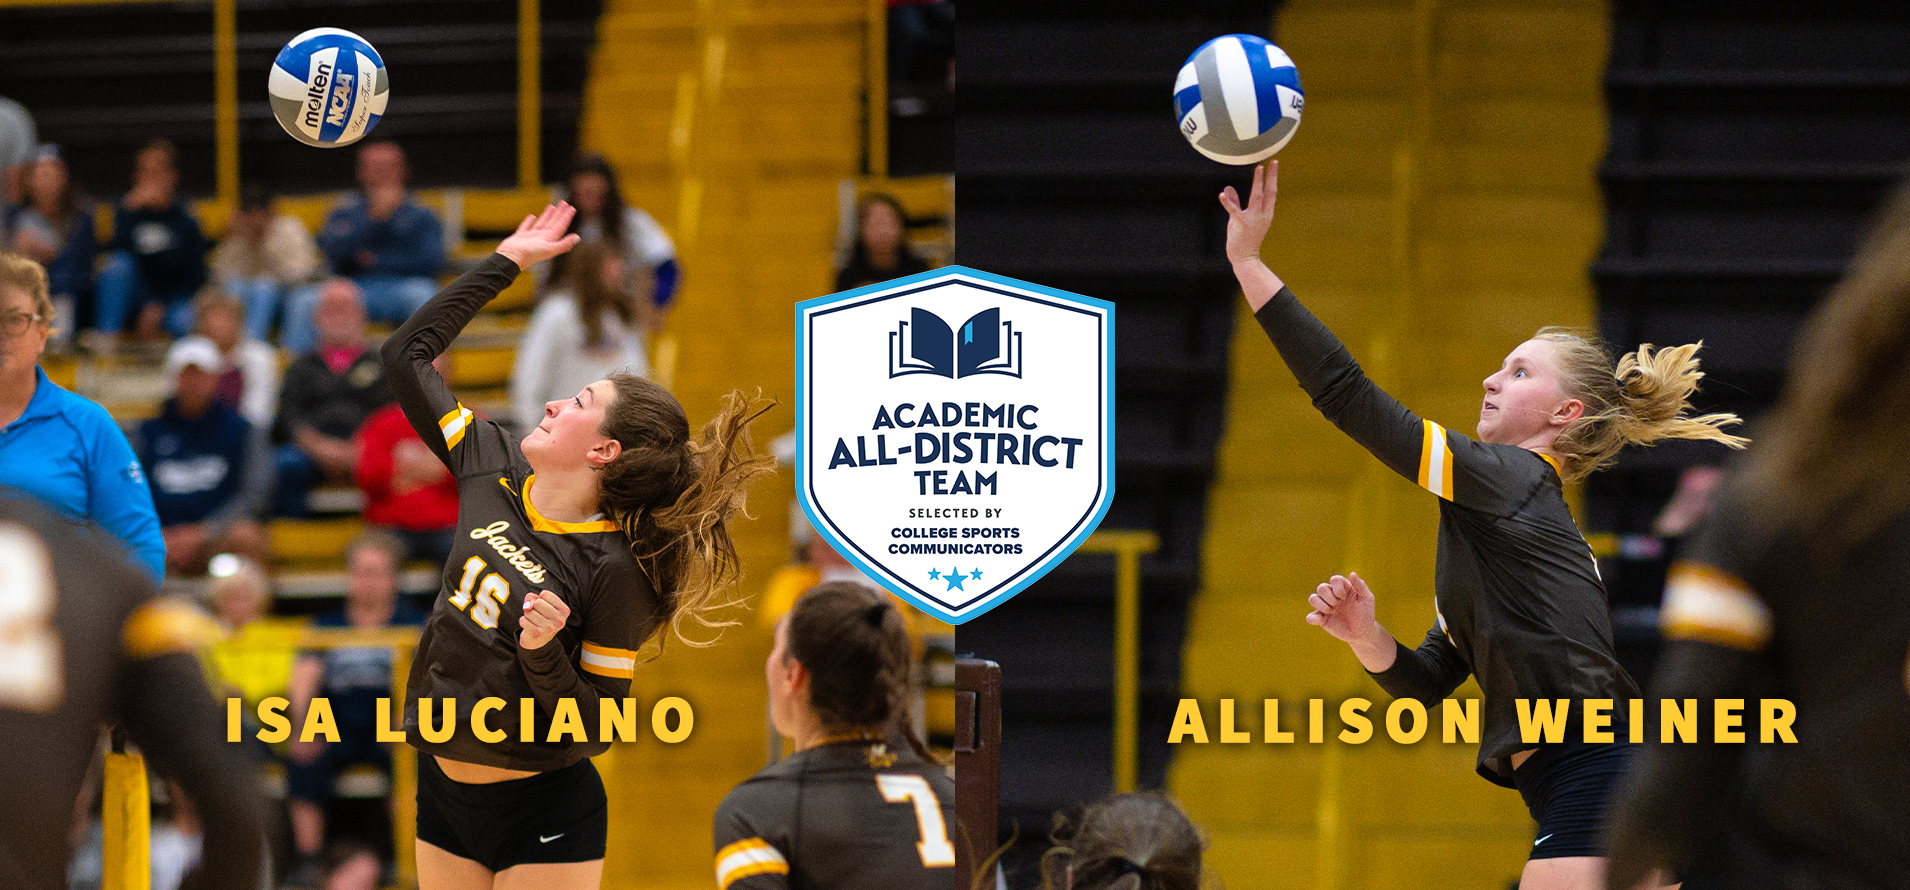 Isa Luciano and Allison Weiner earn Academic All-District honors (photos courtesy of Erik Drost '11)